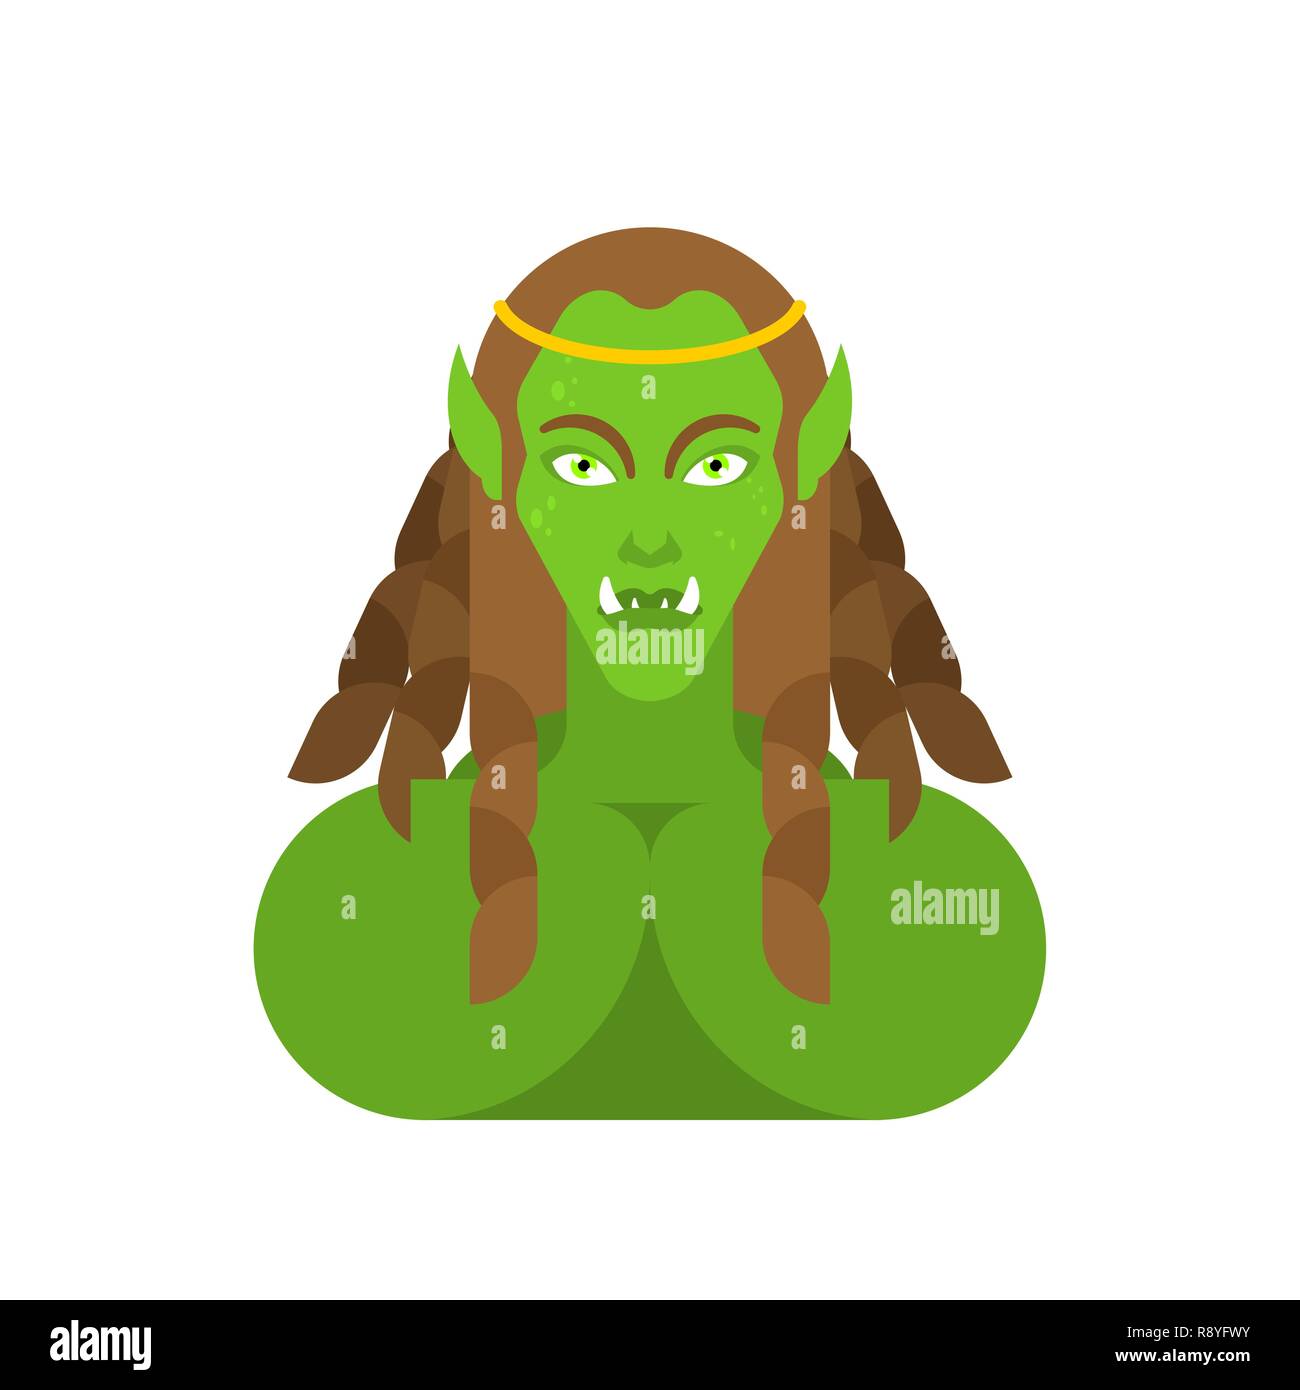 Internet Online Forum Troll Face Stock Illustration - Download Image Now -  Troll - Fictional Character, Animal, Green Color - iStock